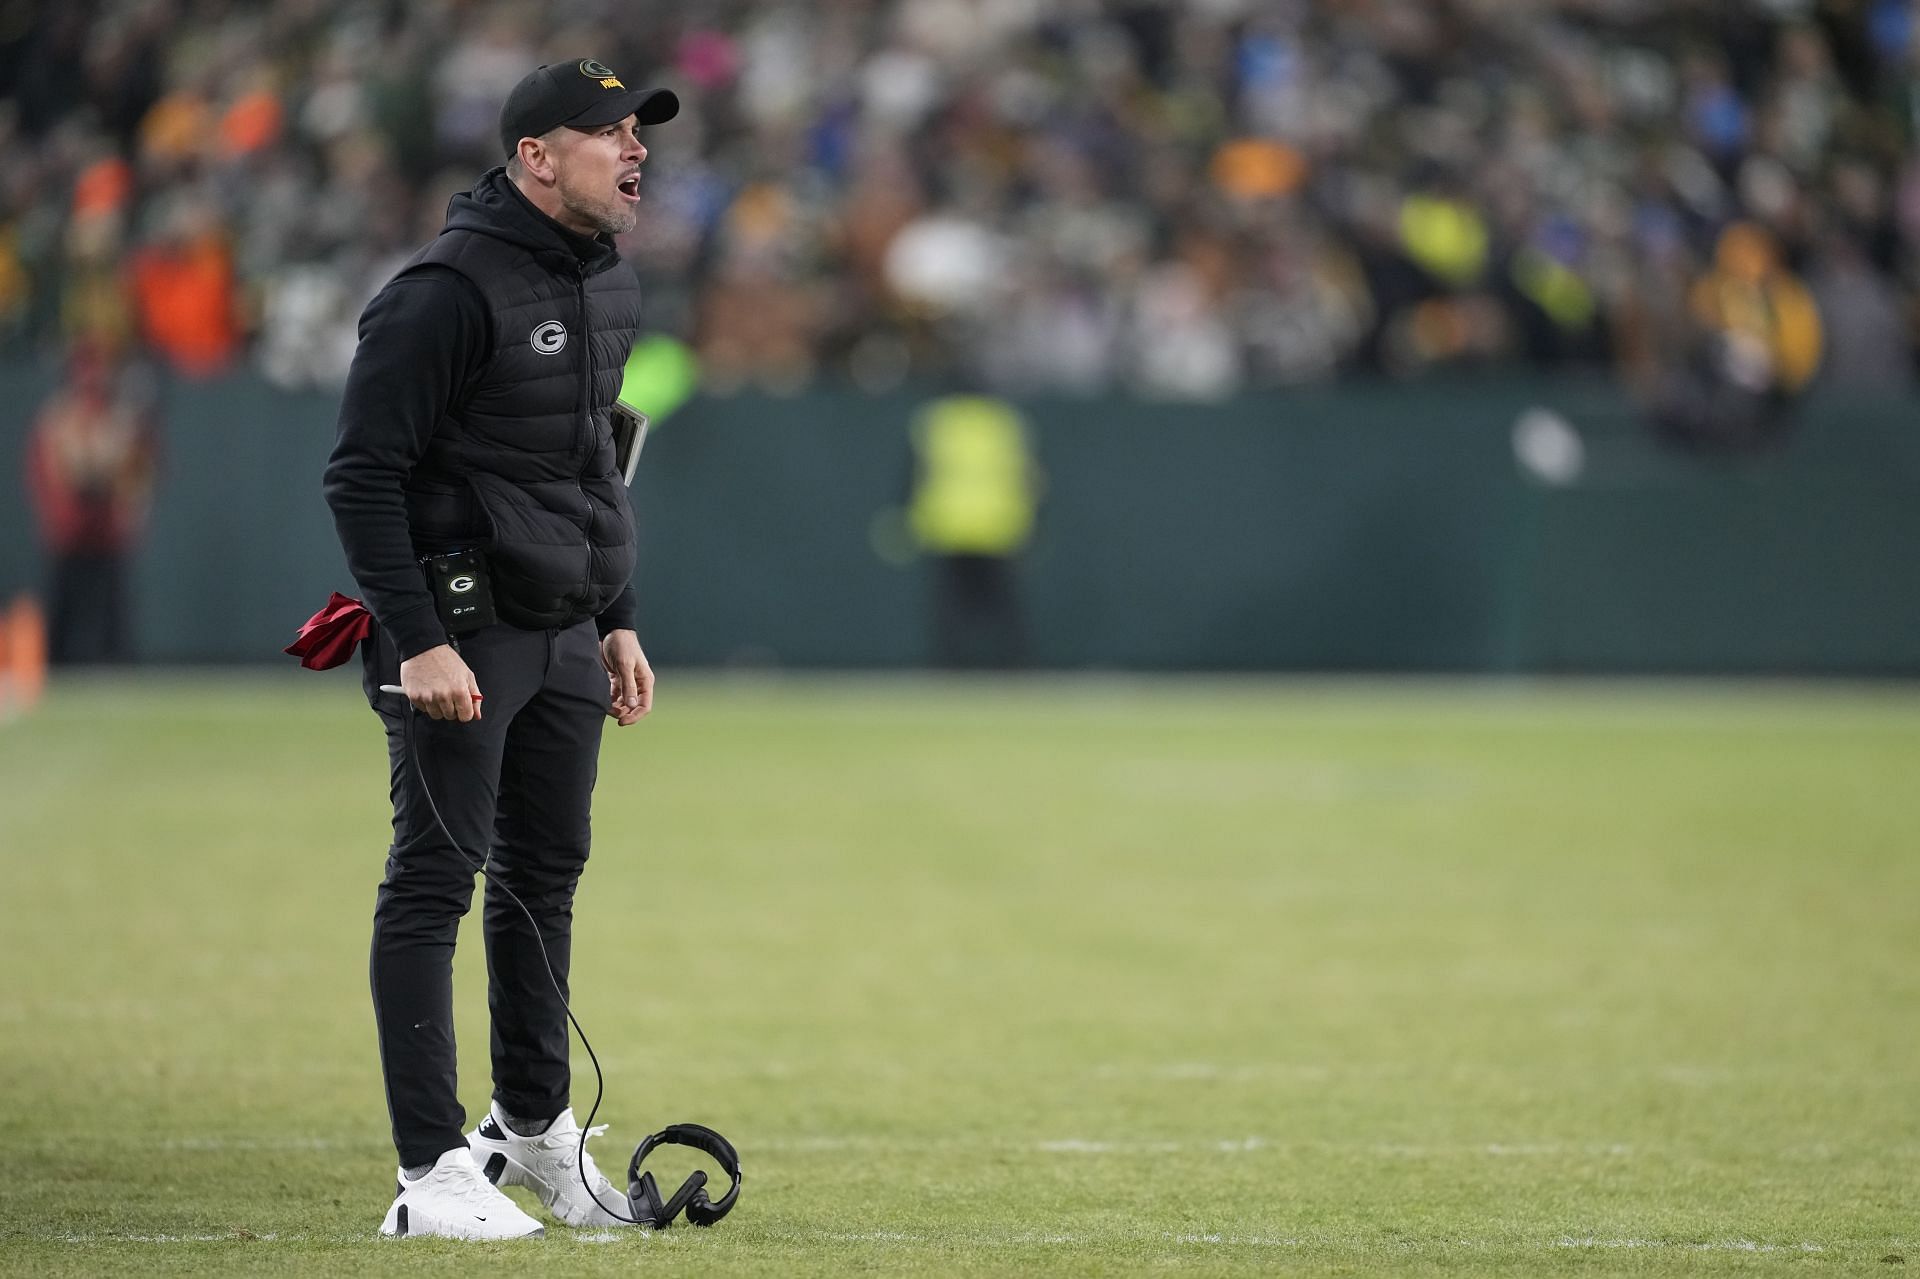 Head coach Matt LaFleur of the Green Bay Packers reacts after a penalty during the fourth quarter against the Detroit Lions